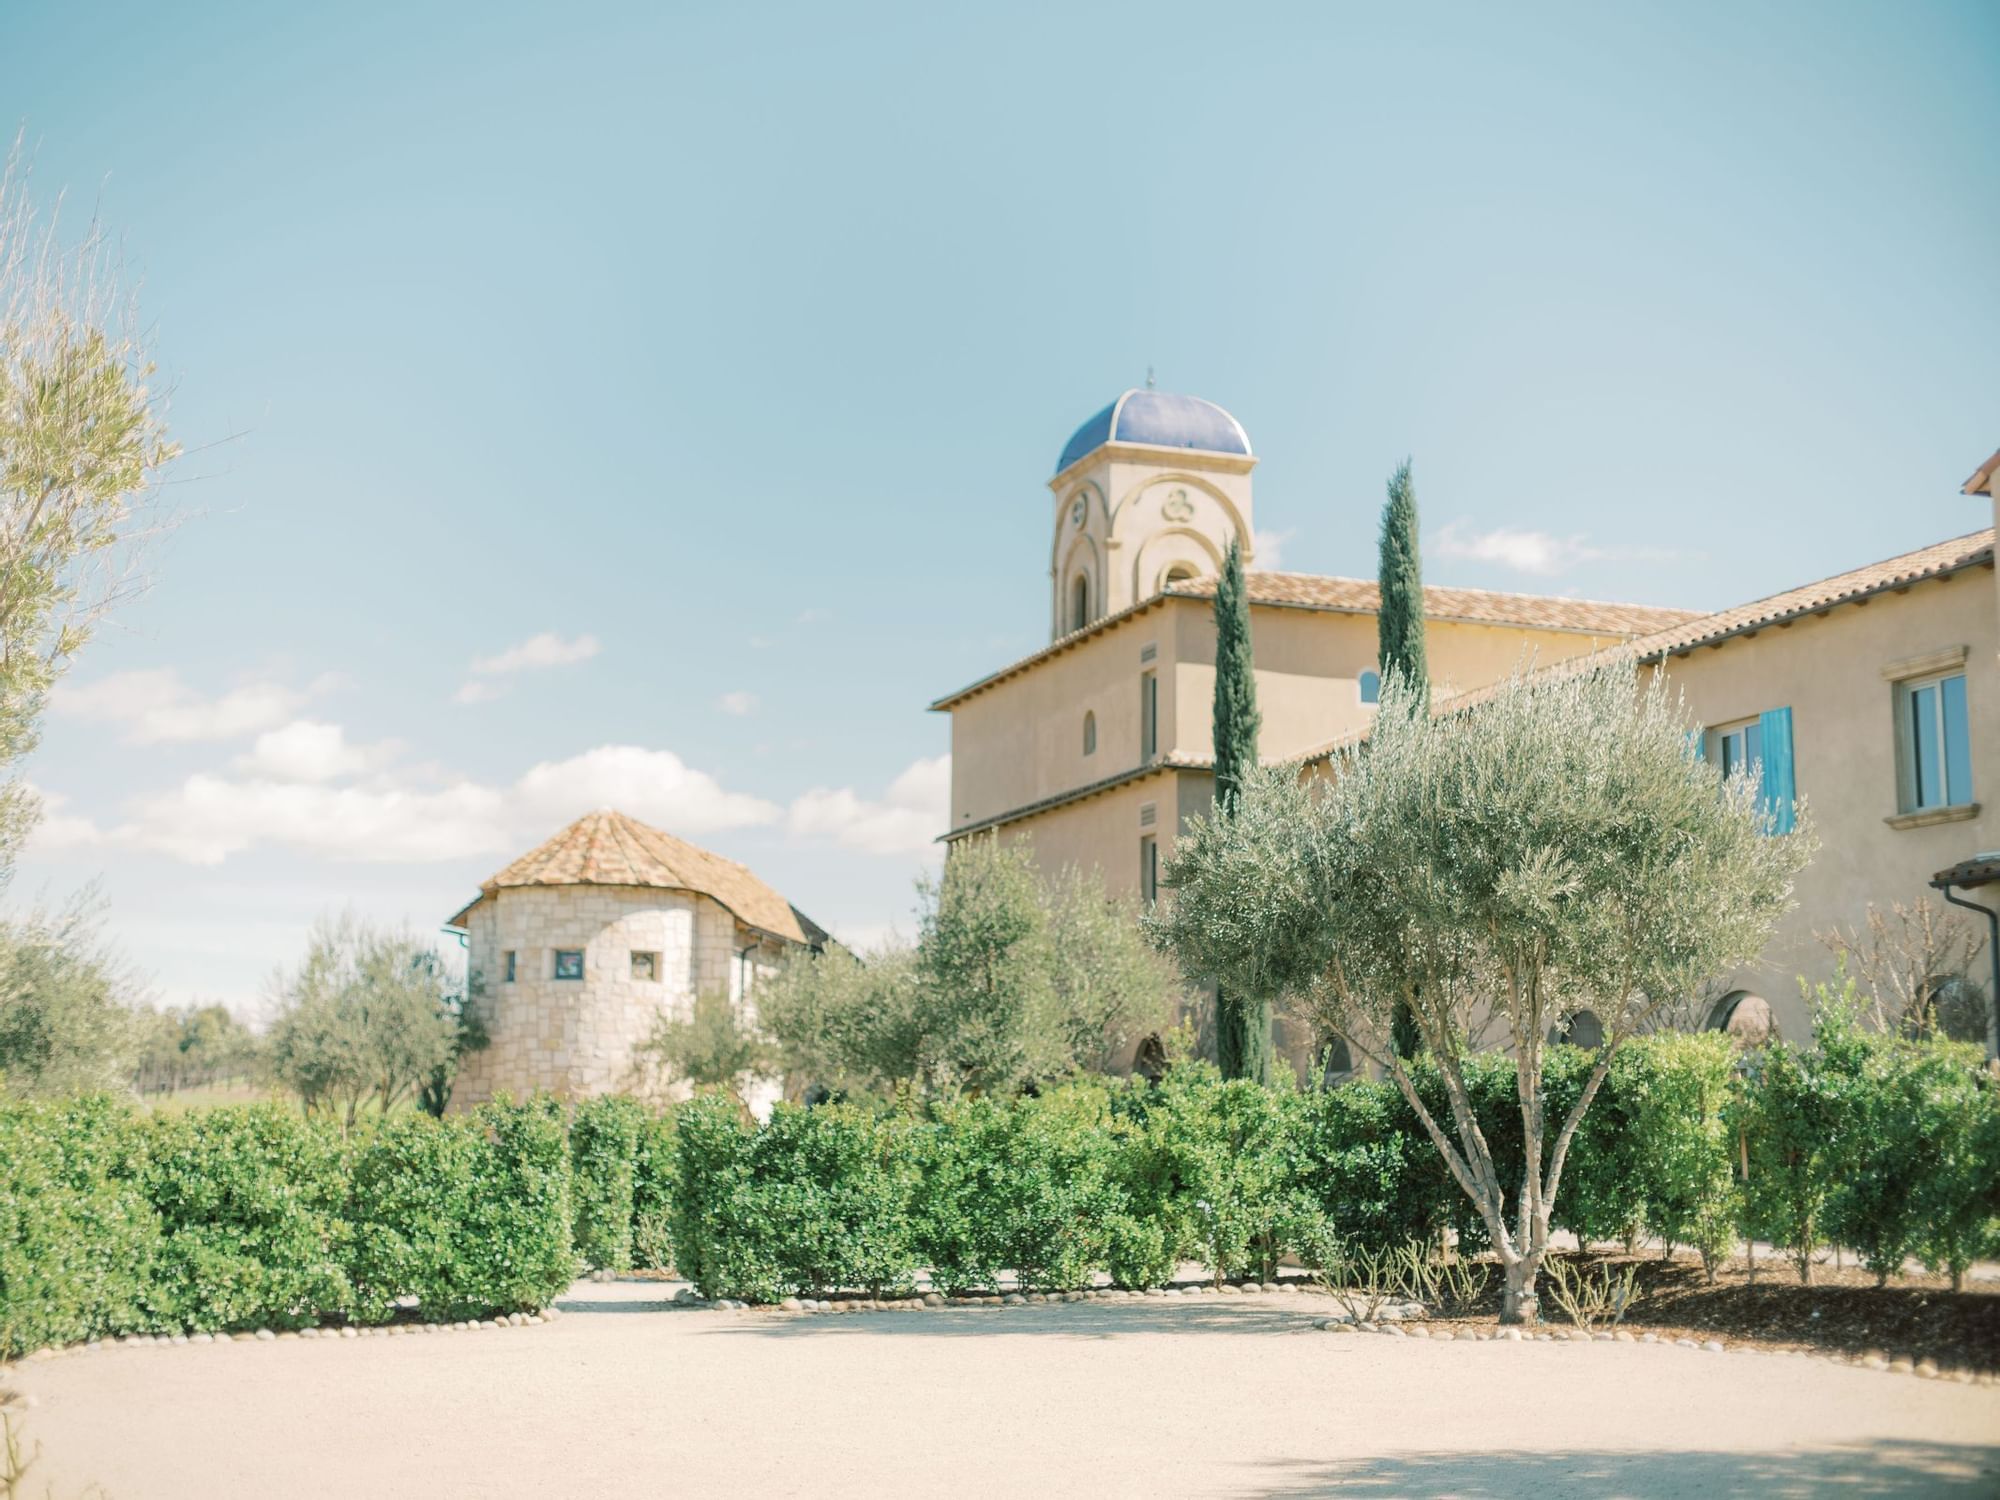 Looking through the landscape of Allegretto Resort at the Abbey